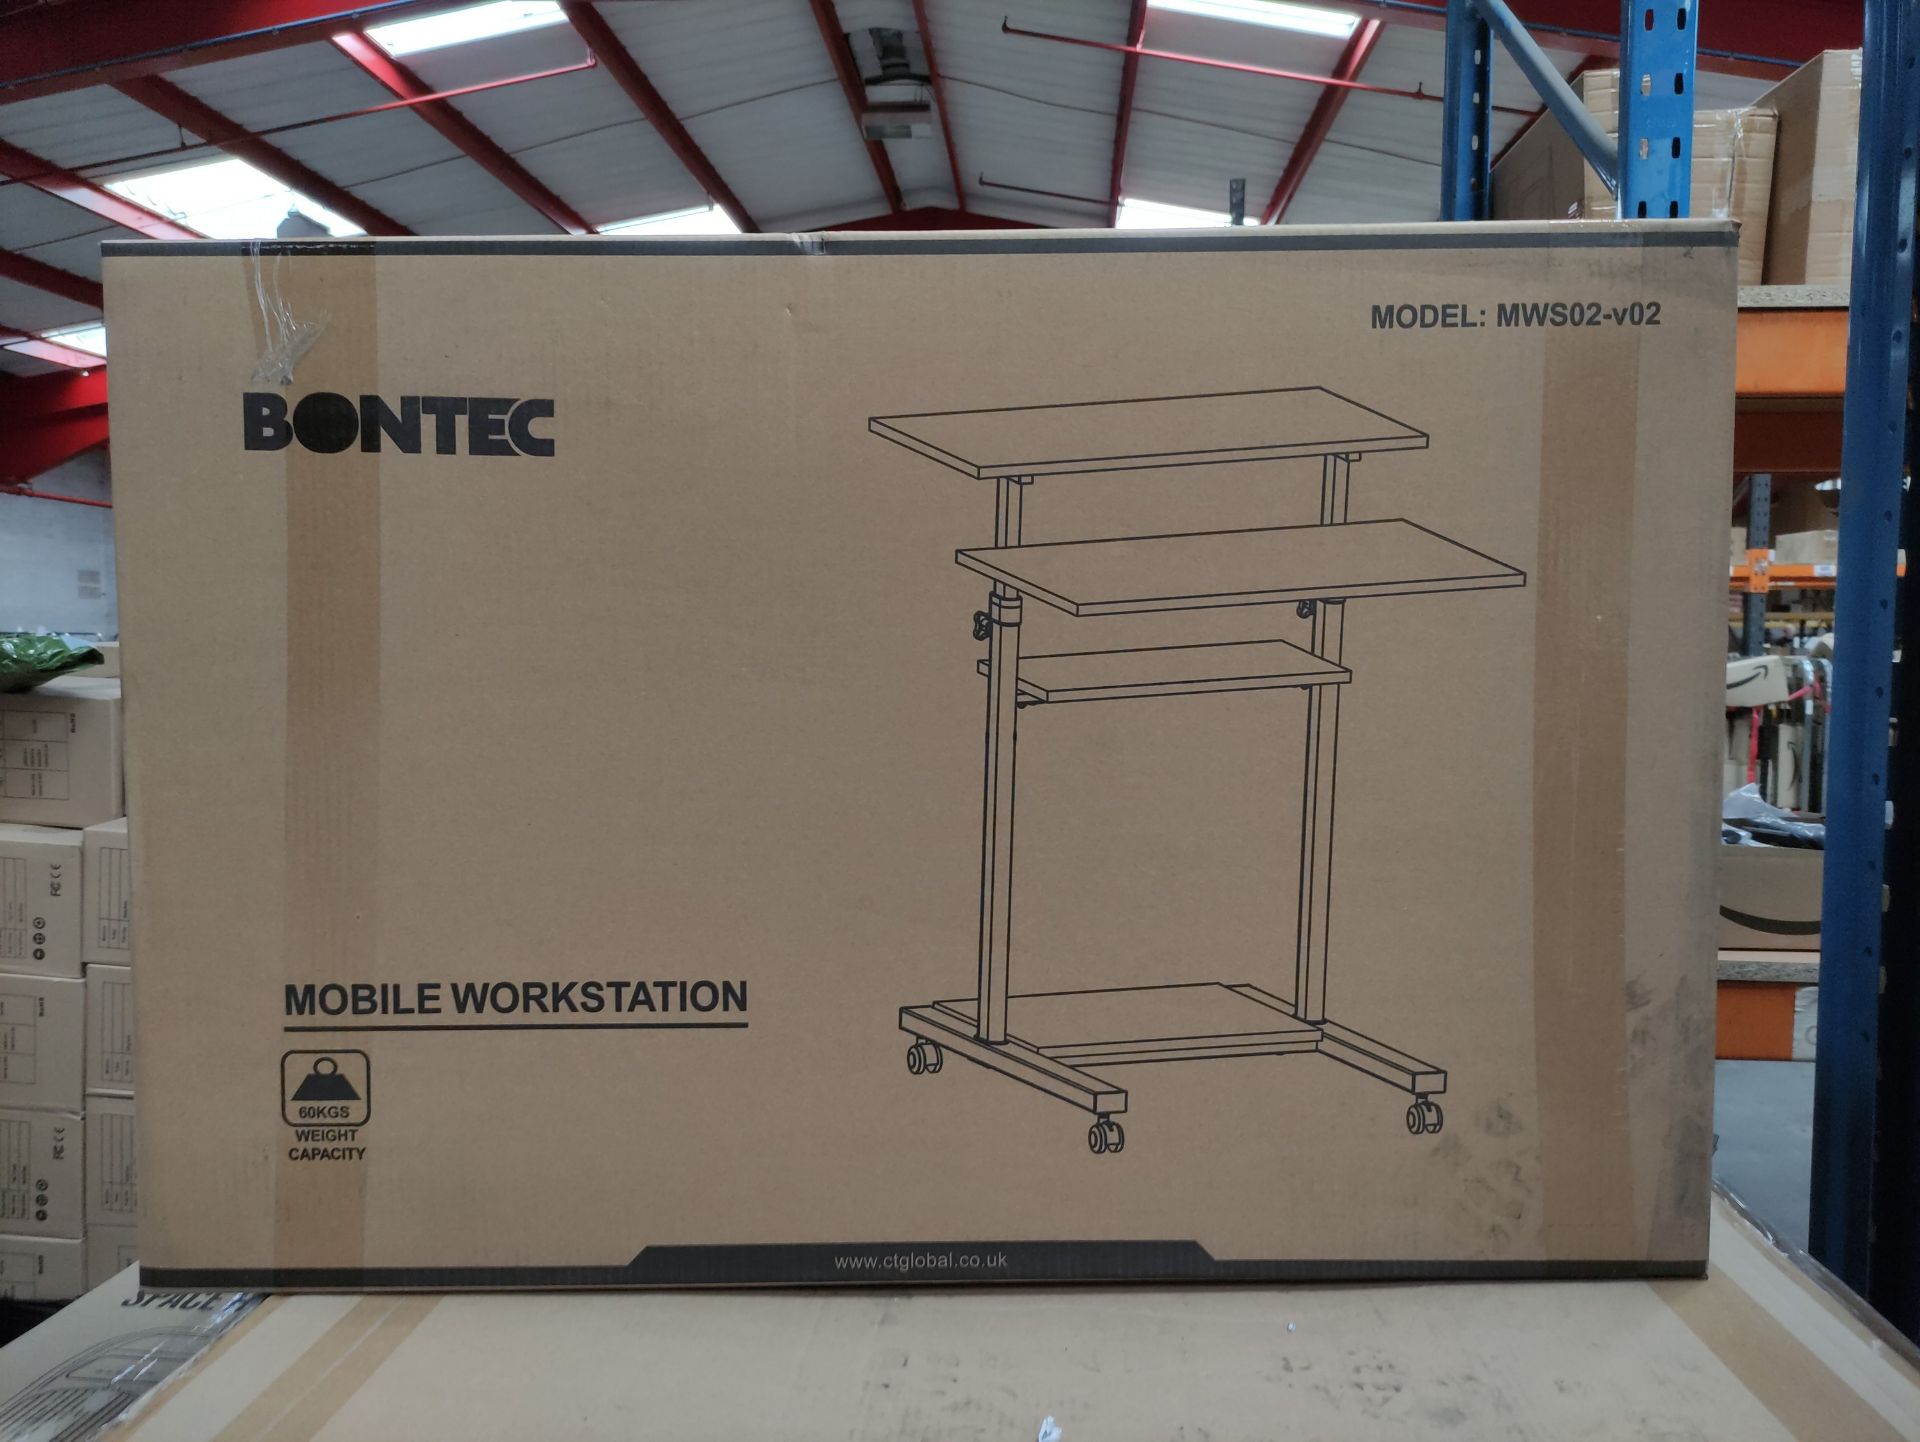 RRP £115.99 BRAND NEW STOCK BONTEC Mobile Workstation Compact Stand-up Computer - Image 2 of 2